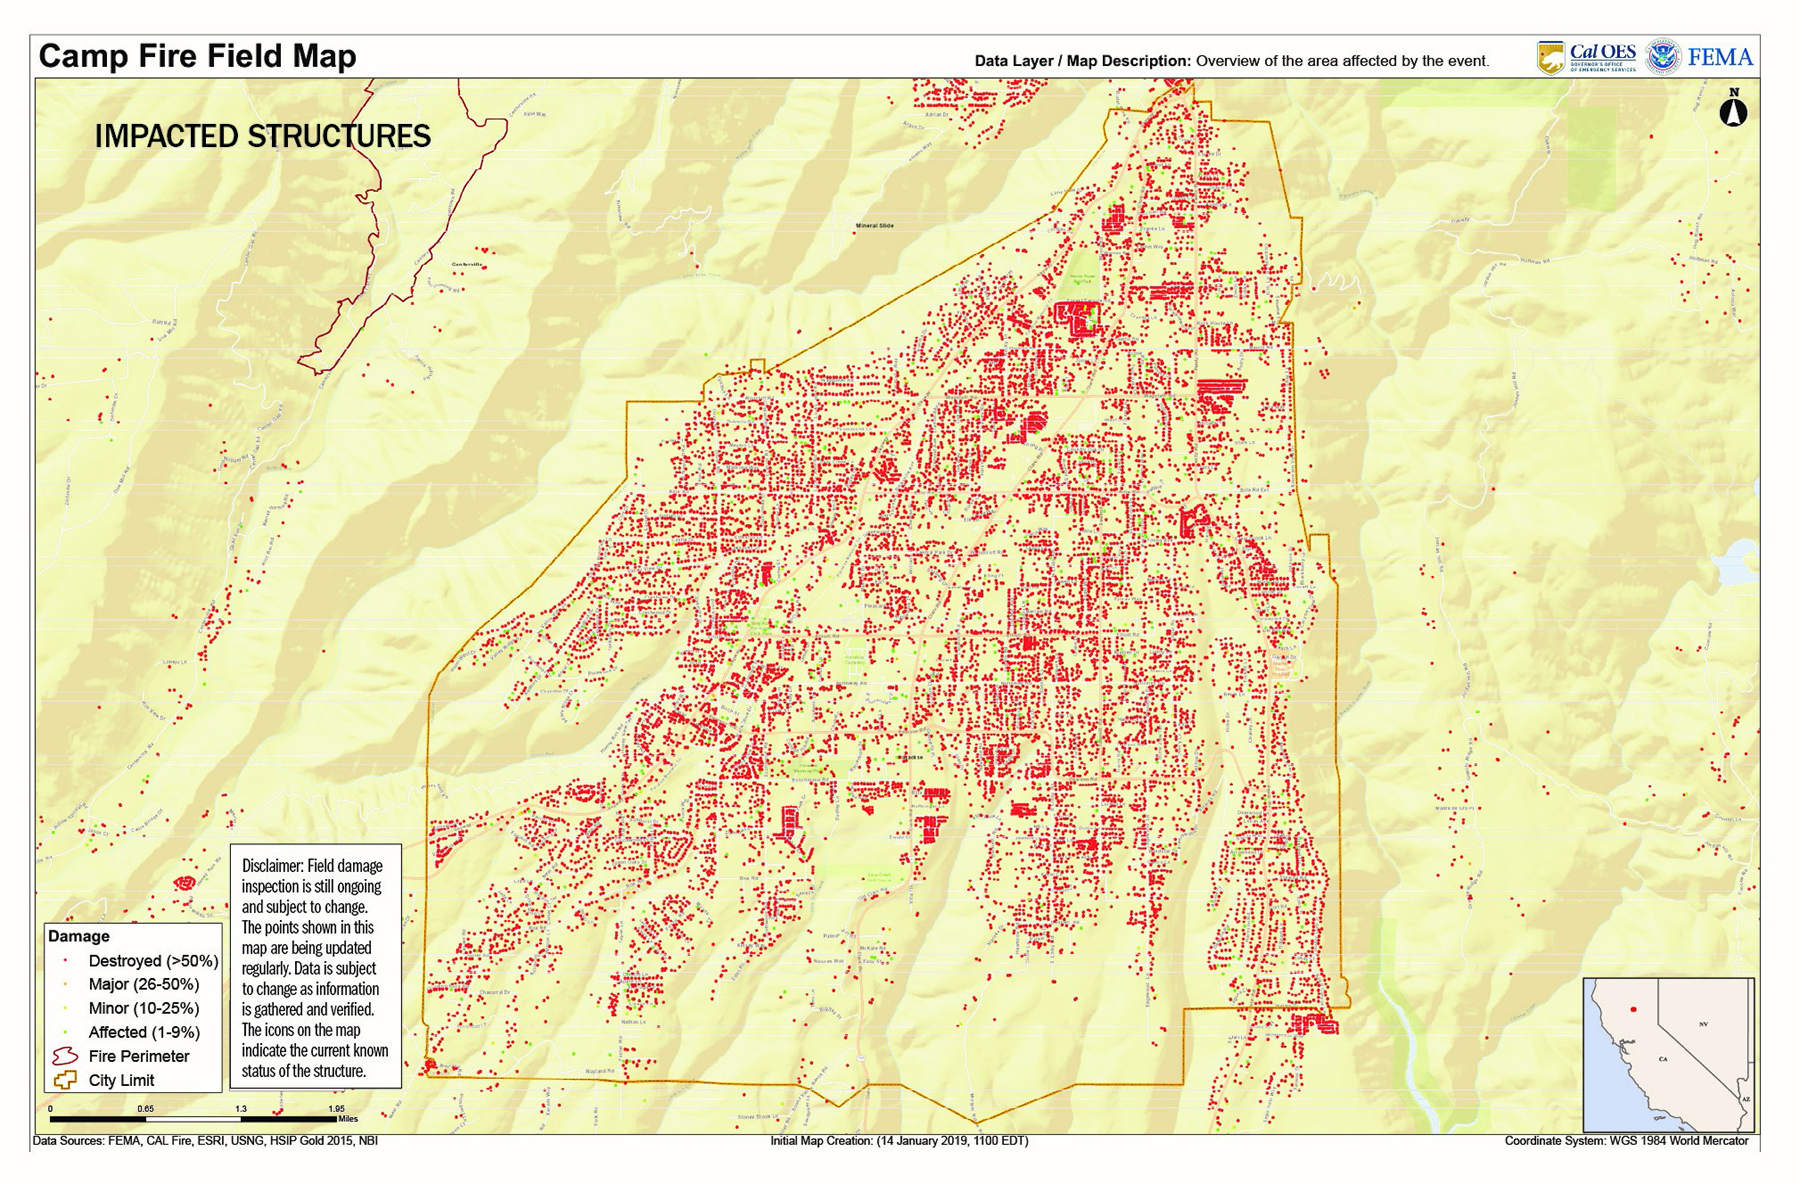 map of the impacted structures caused by the November 2018 Camp Fire in Paradise, California